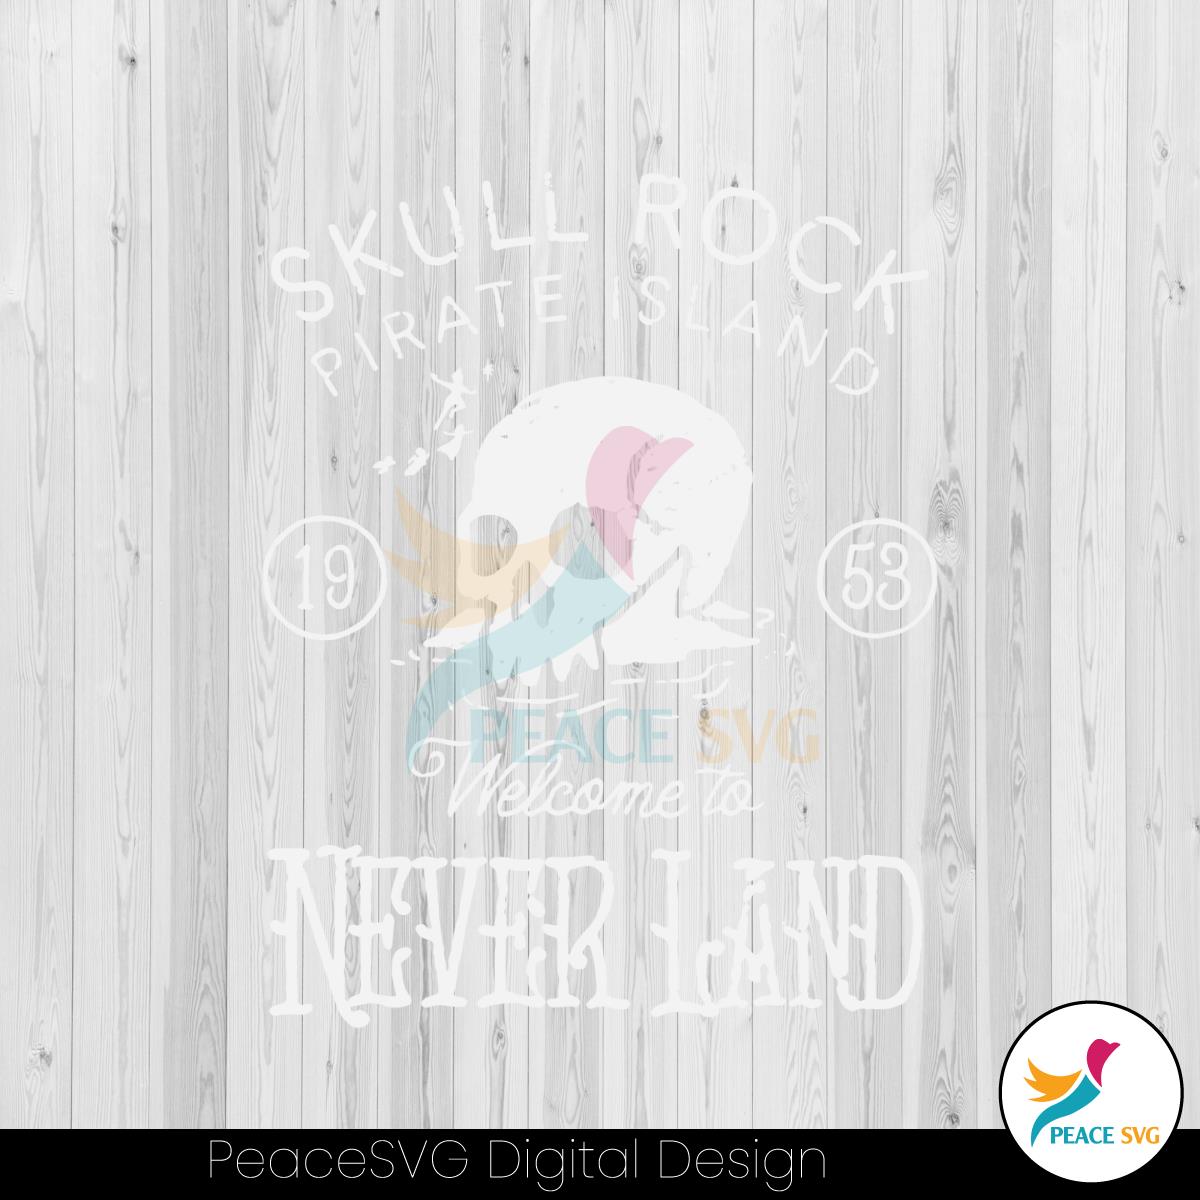 skull-rock-pirate-island-welcome-to-never-land-svg-download